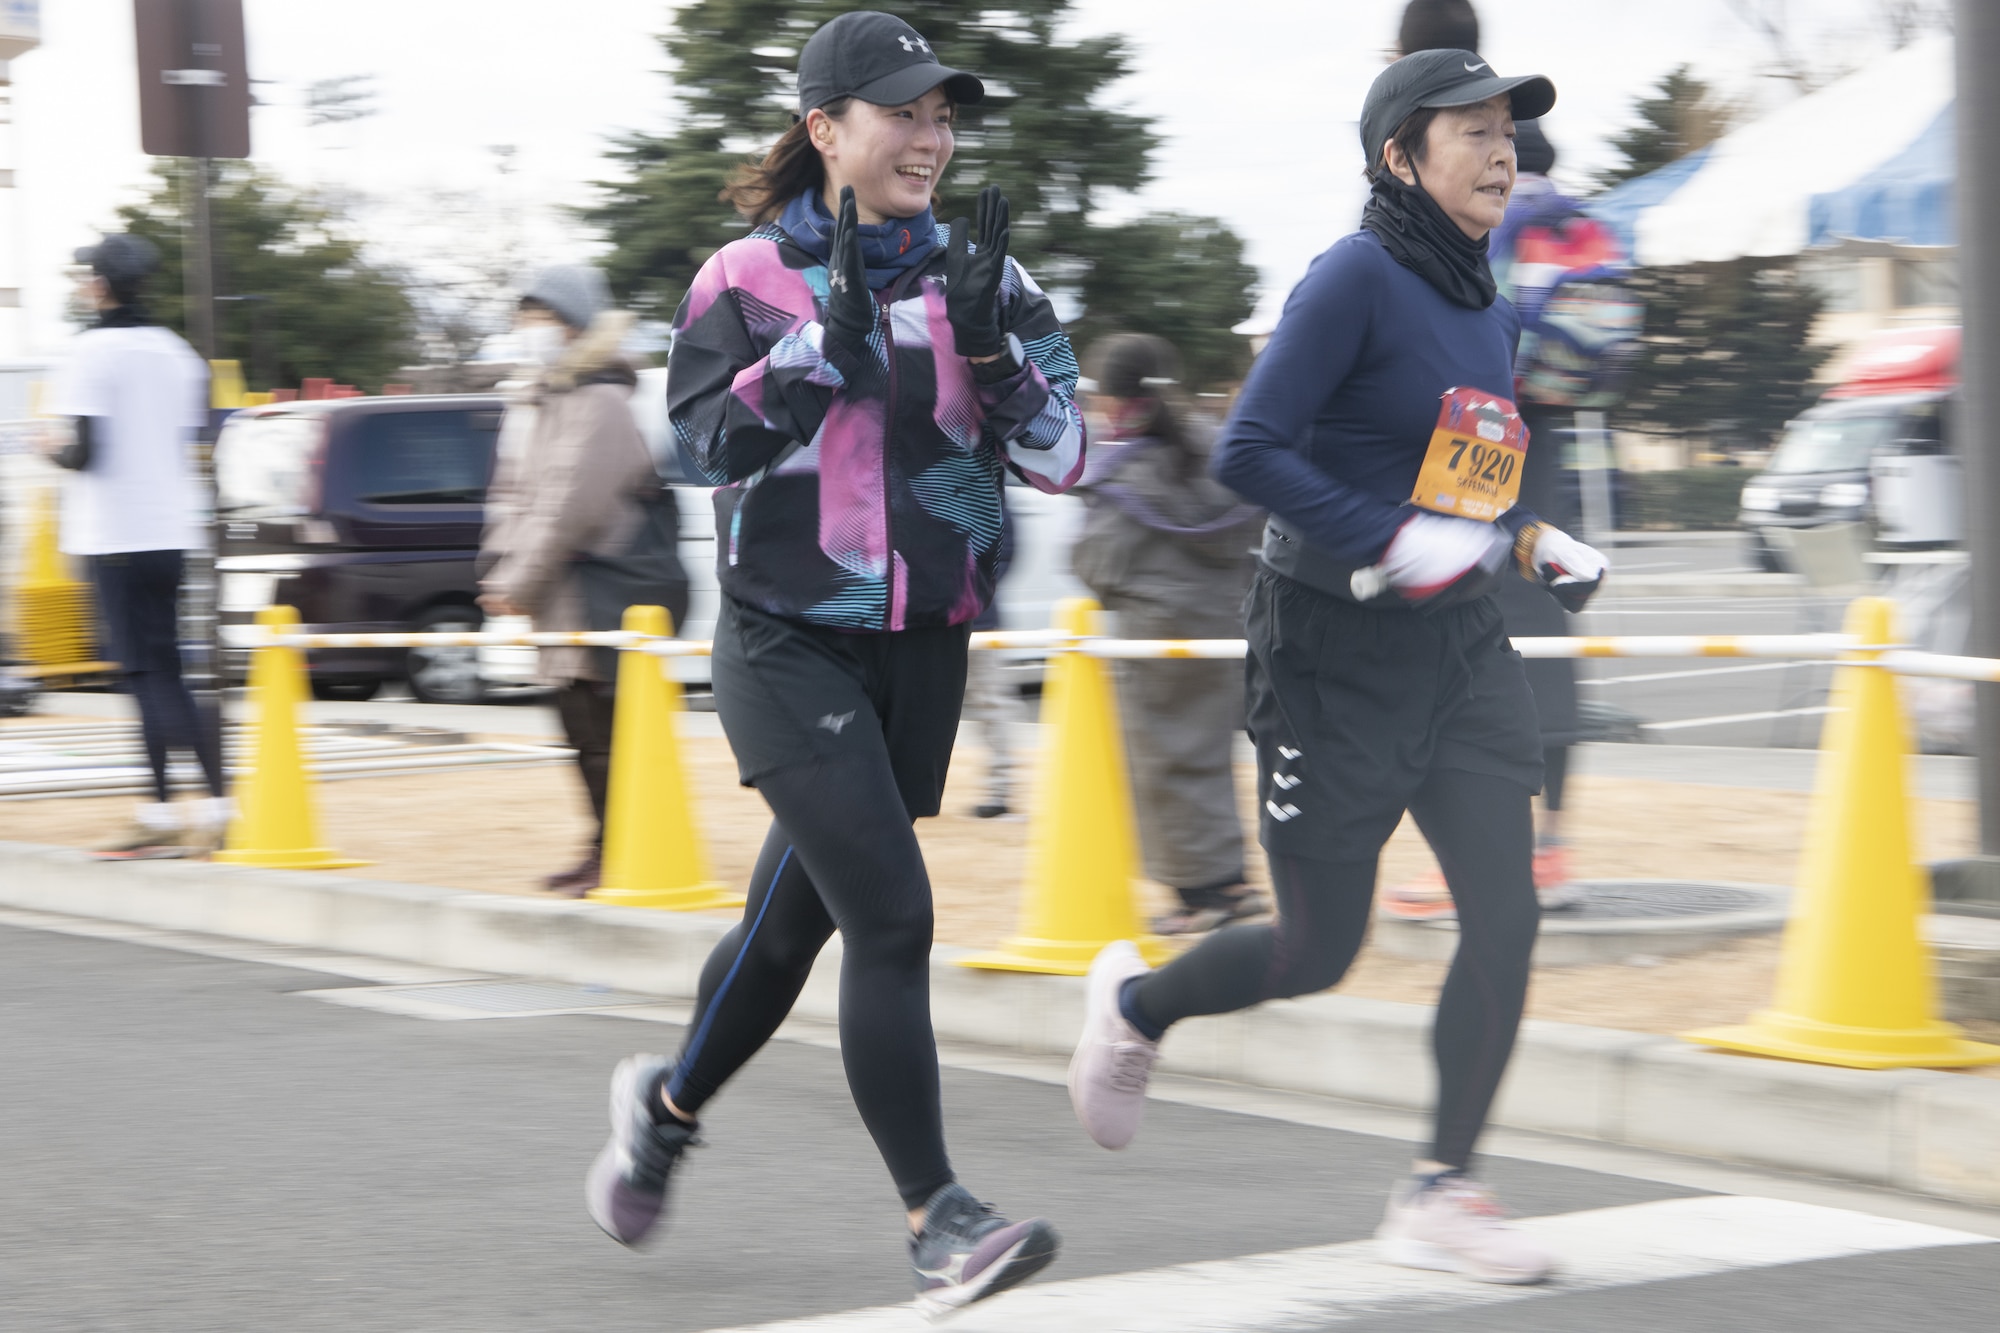 Runners participating in a 5-km run event speed towards the finish line during the 42nd annual Frostbite Road Race.